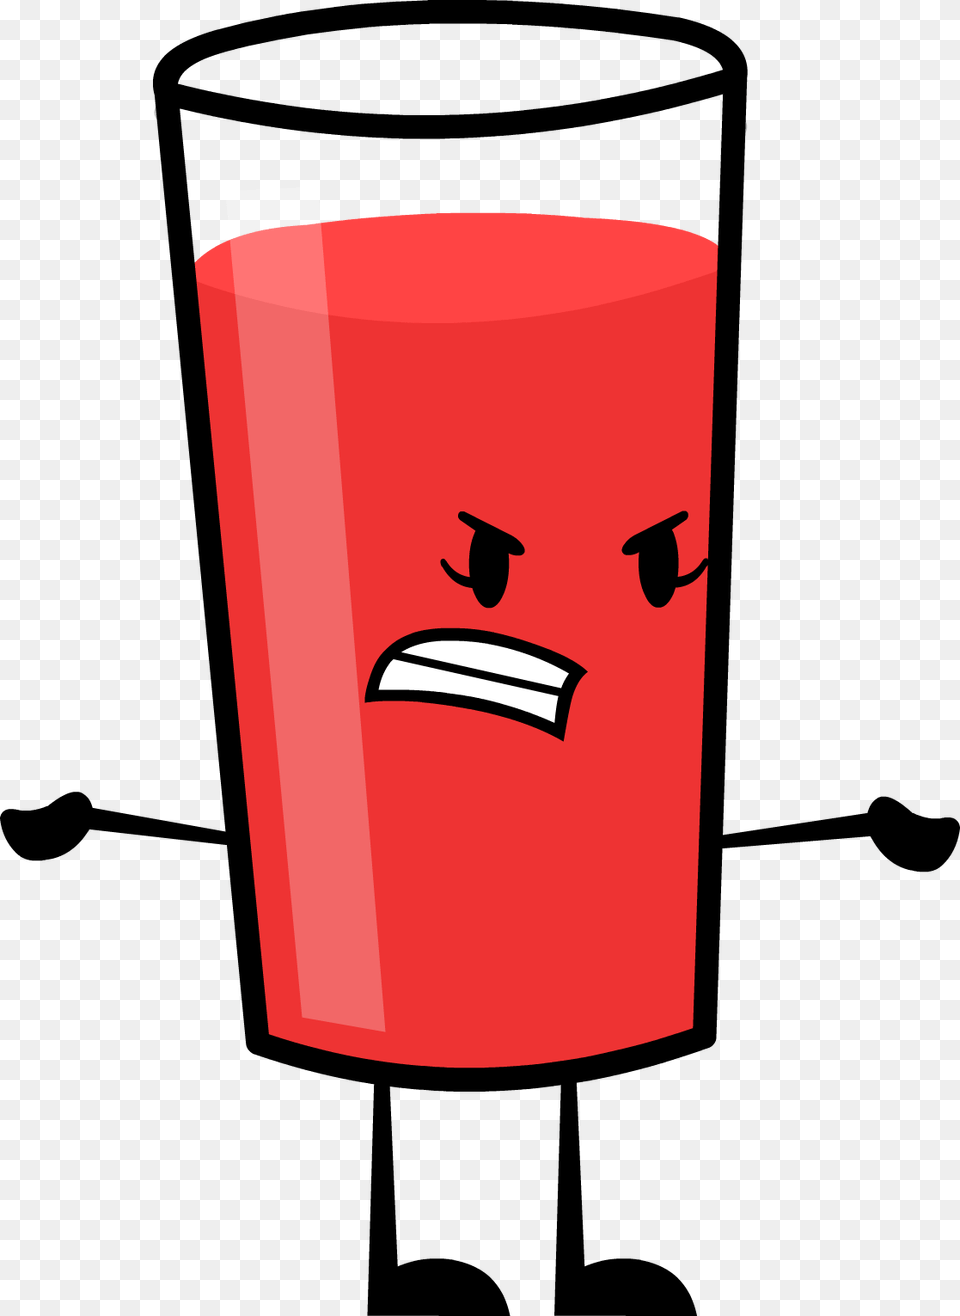 Fruit Punch39s New Pose Bfdi Sticker, Dynamite, Weapon Png Image